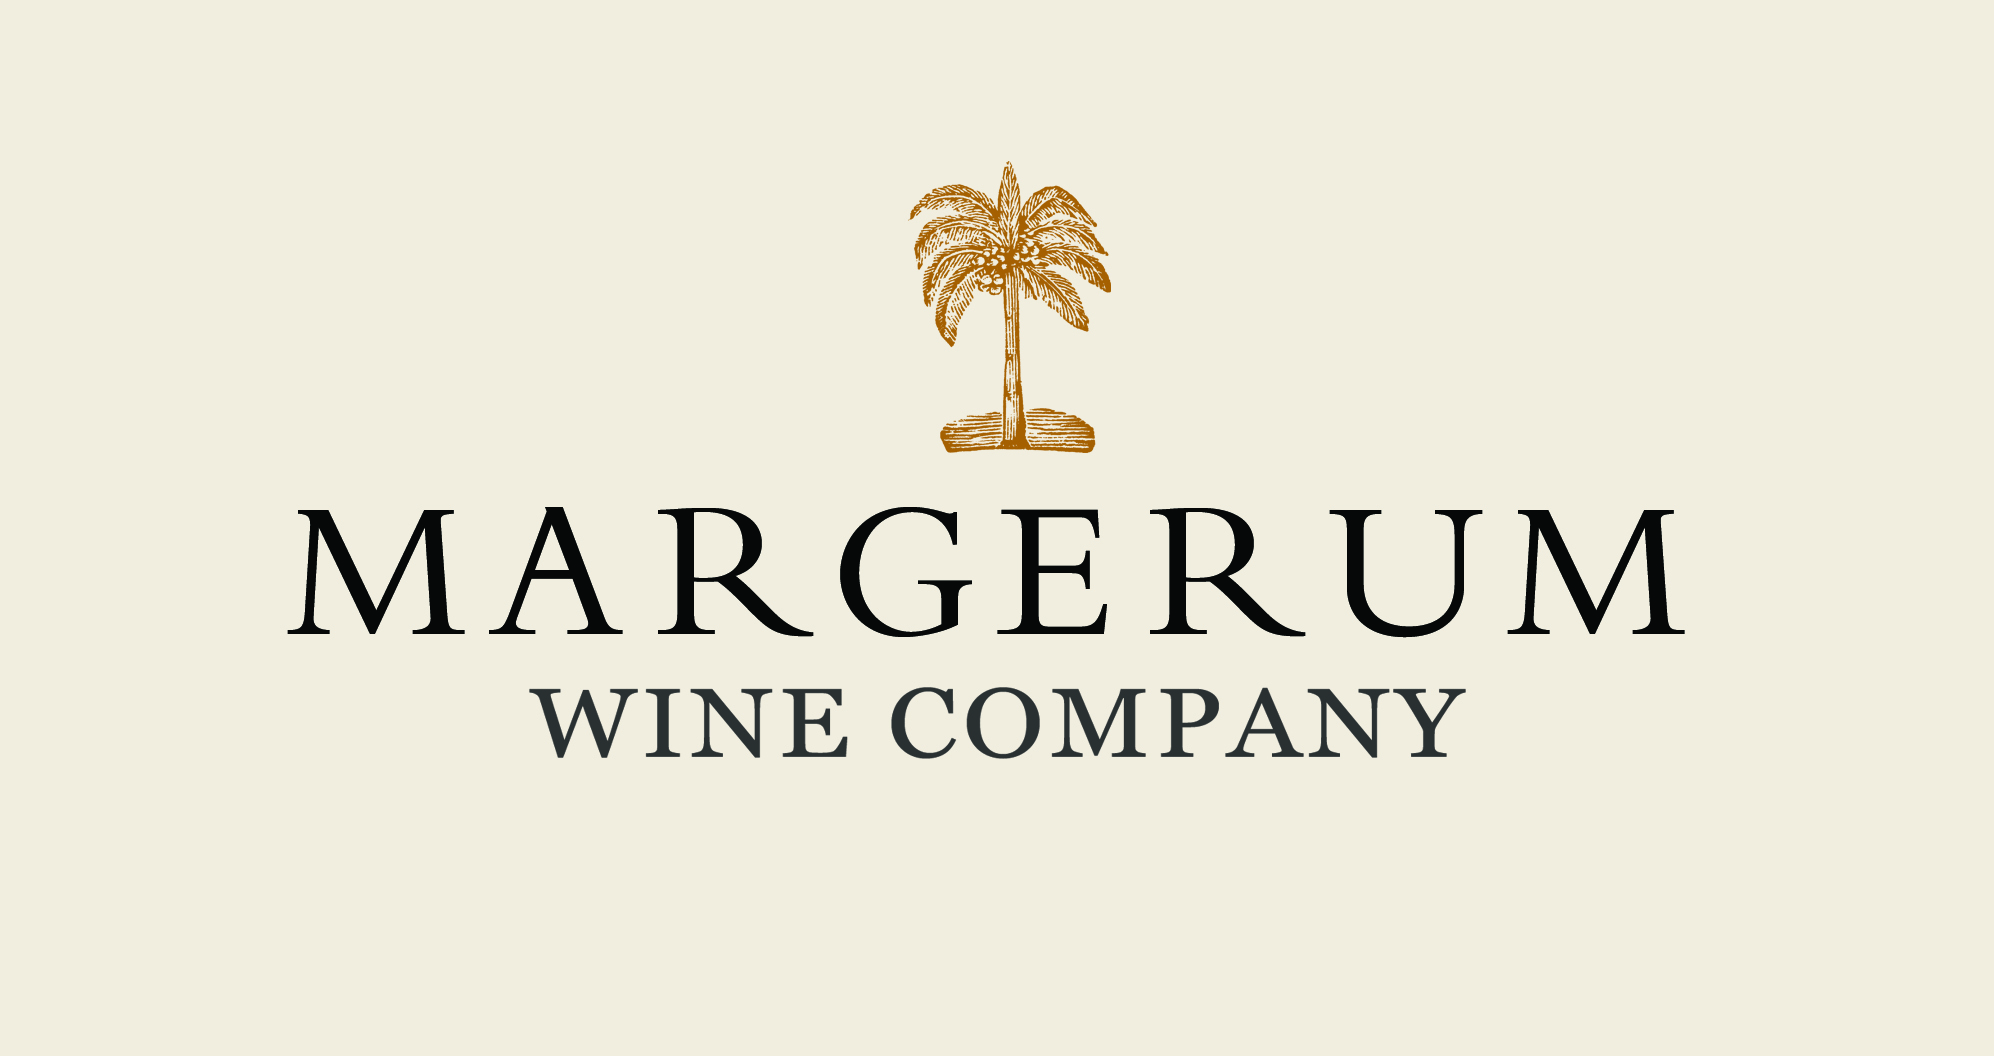 Margerum Wine Company Specials and Promos